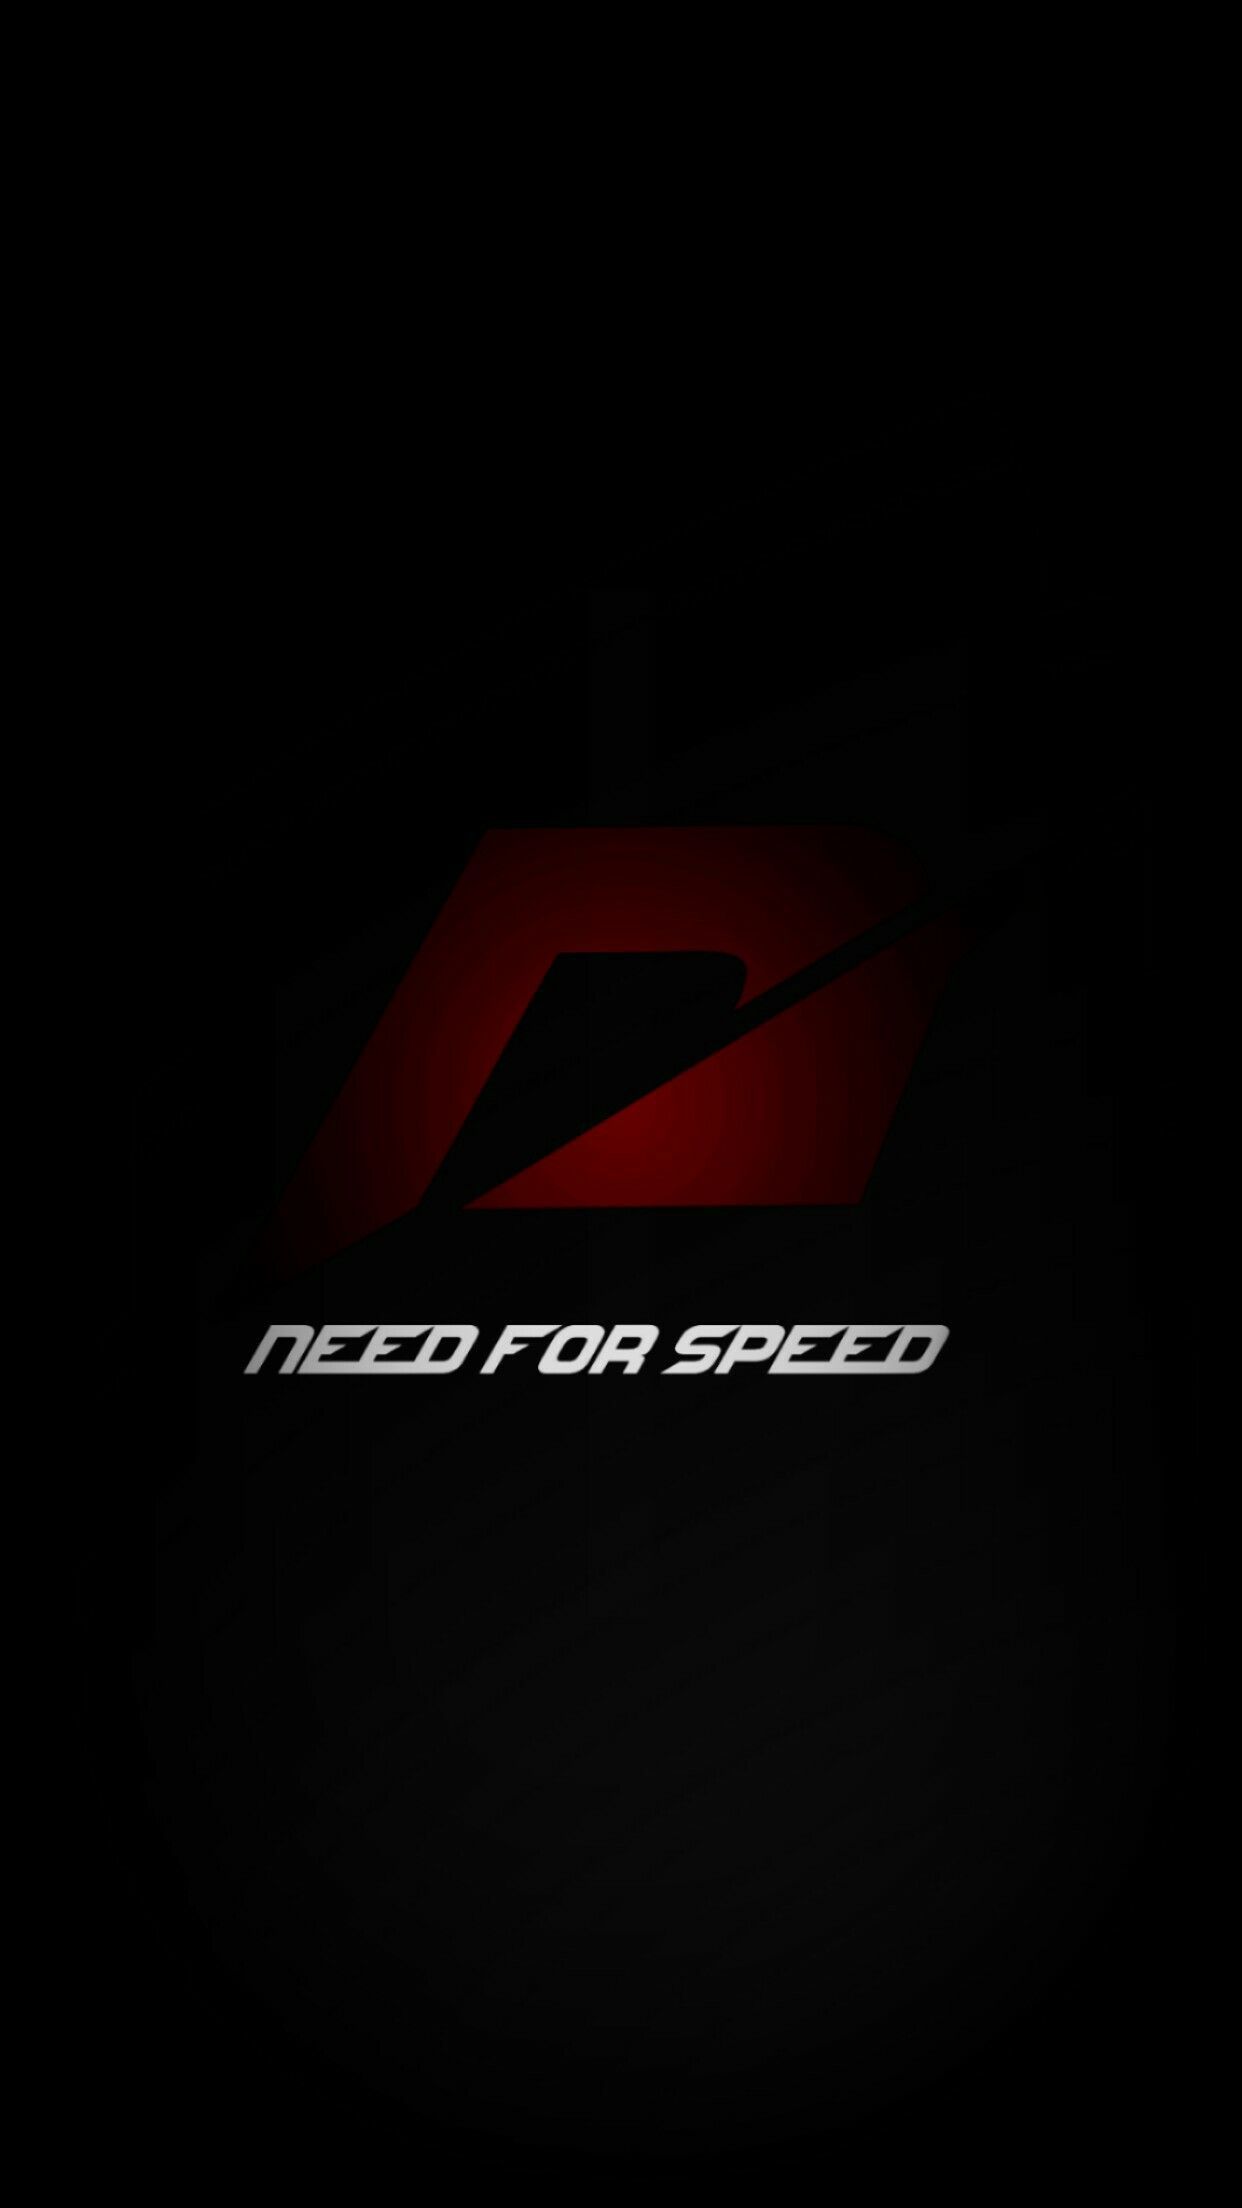 need for speed.logo.iphone wallpaper. Need for speed cars, Need for speed movie, Need for speed